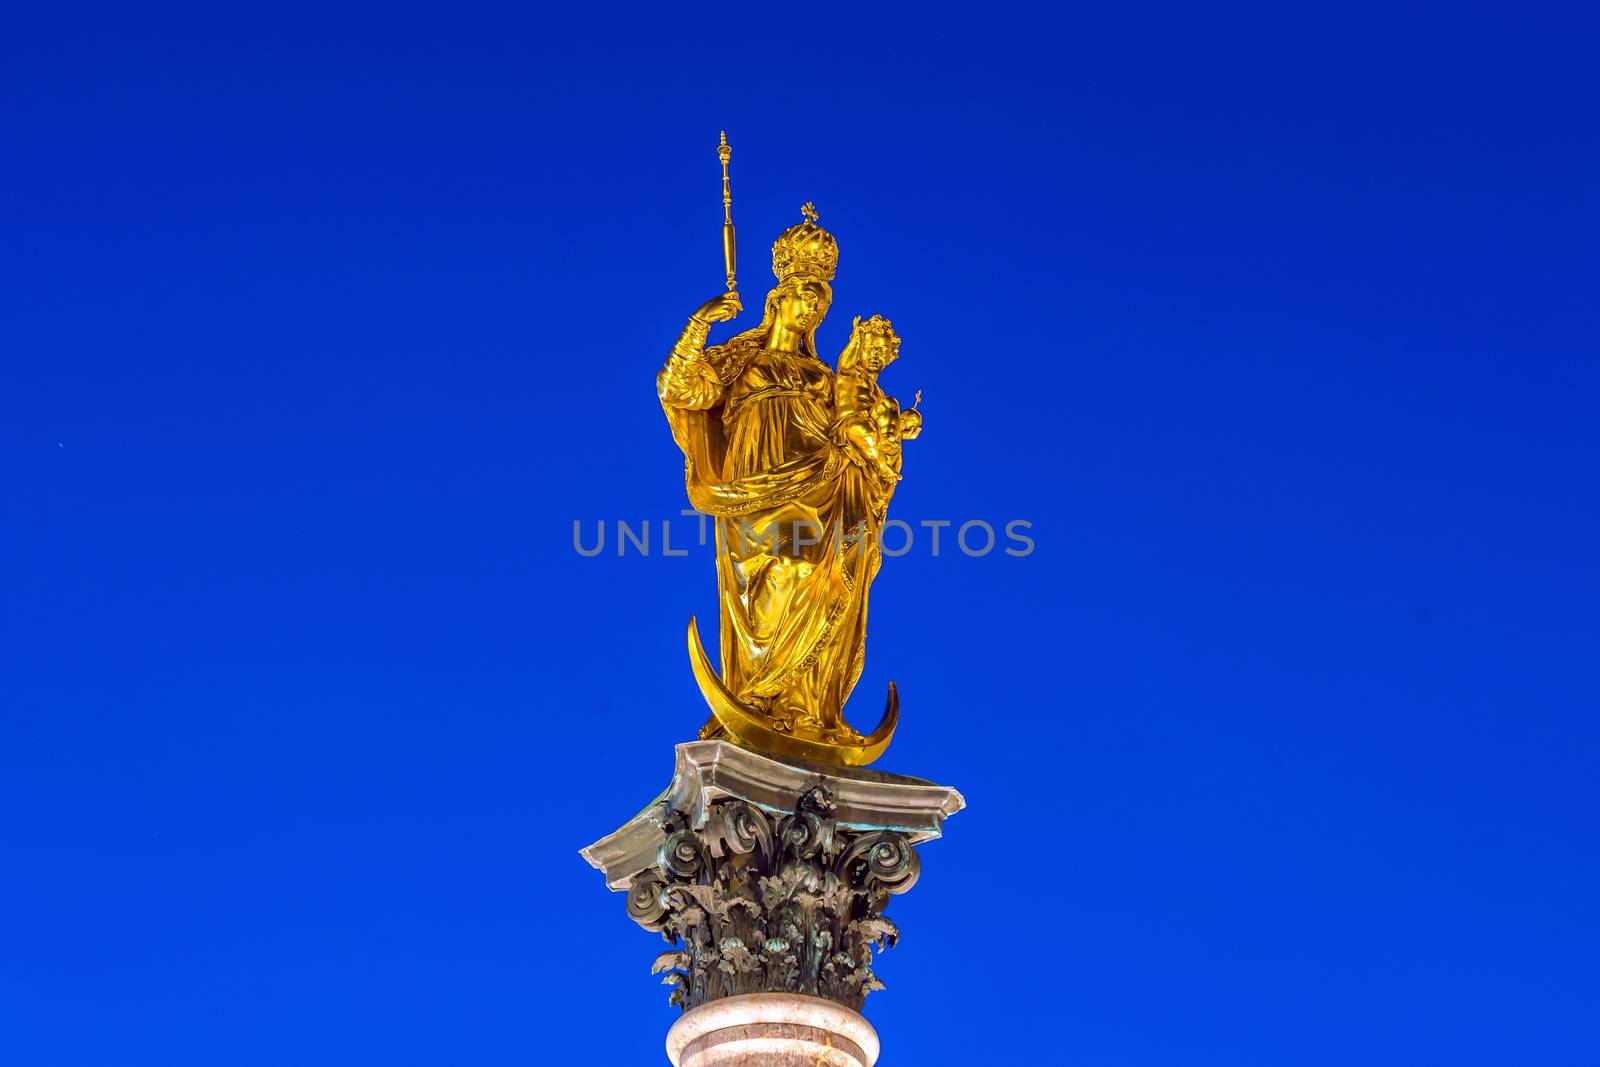 Steeple of the Peace Column with famous golden Angel of Peace statue in Munich, Germany